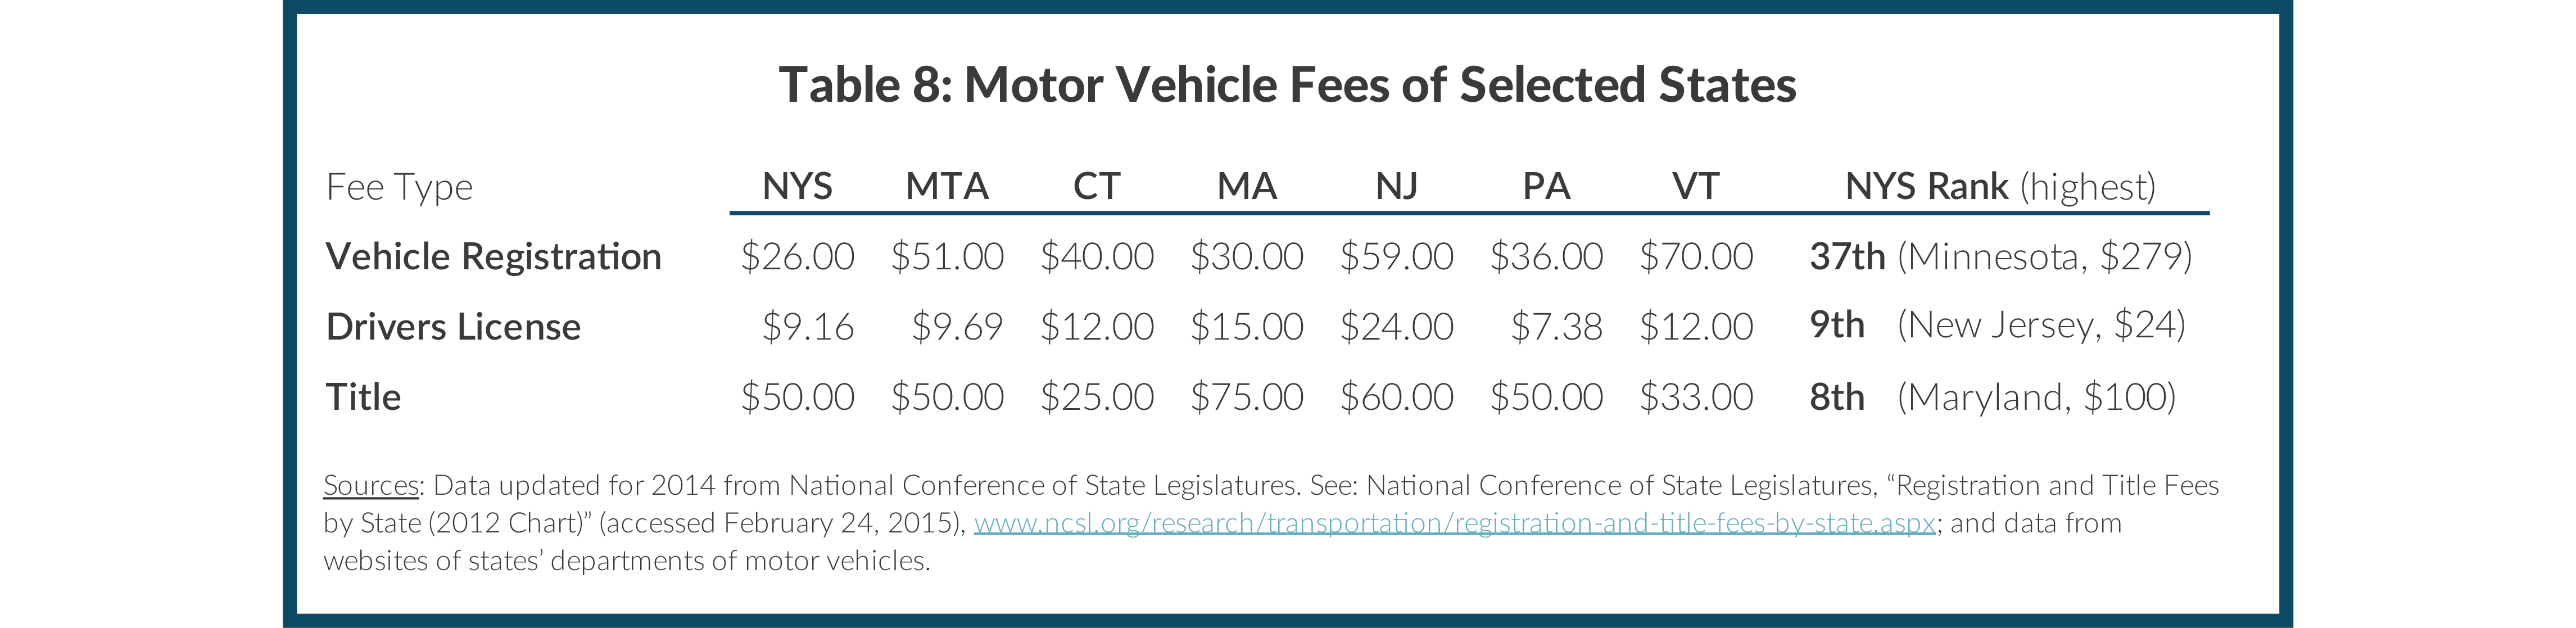 Table 8: Motor Vehicle Fees of Selected States